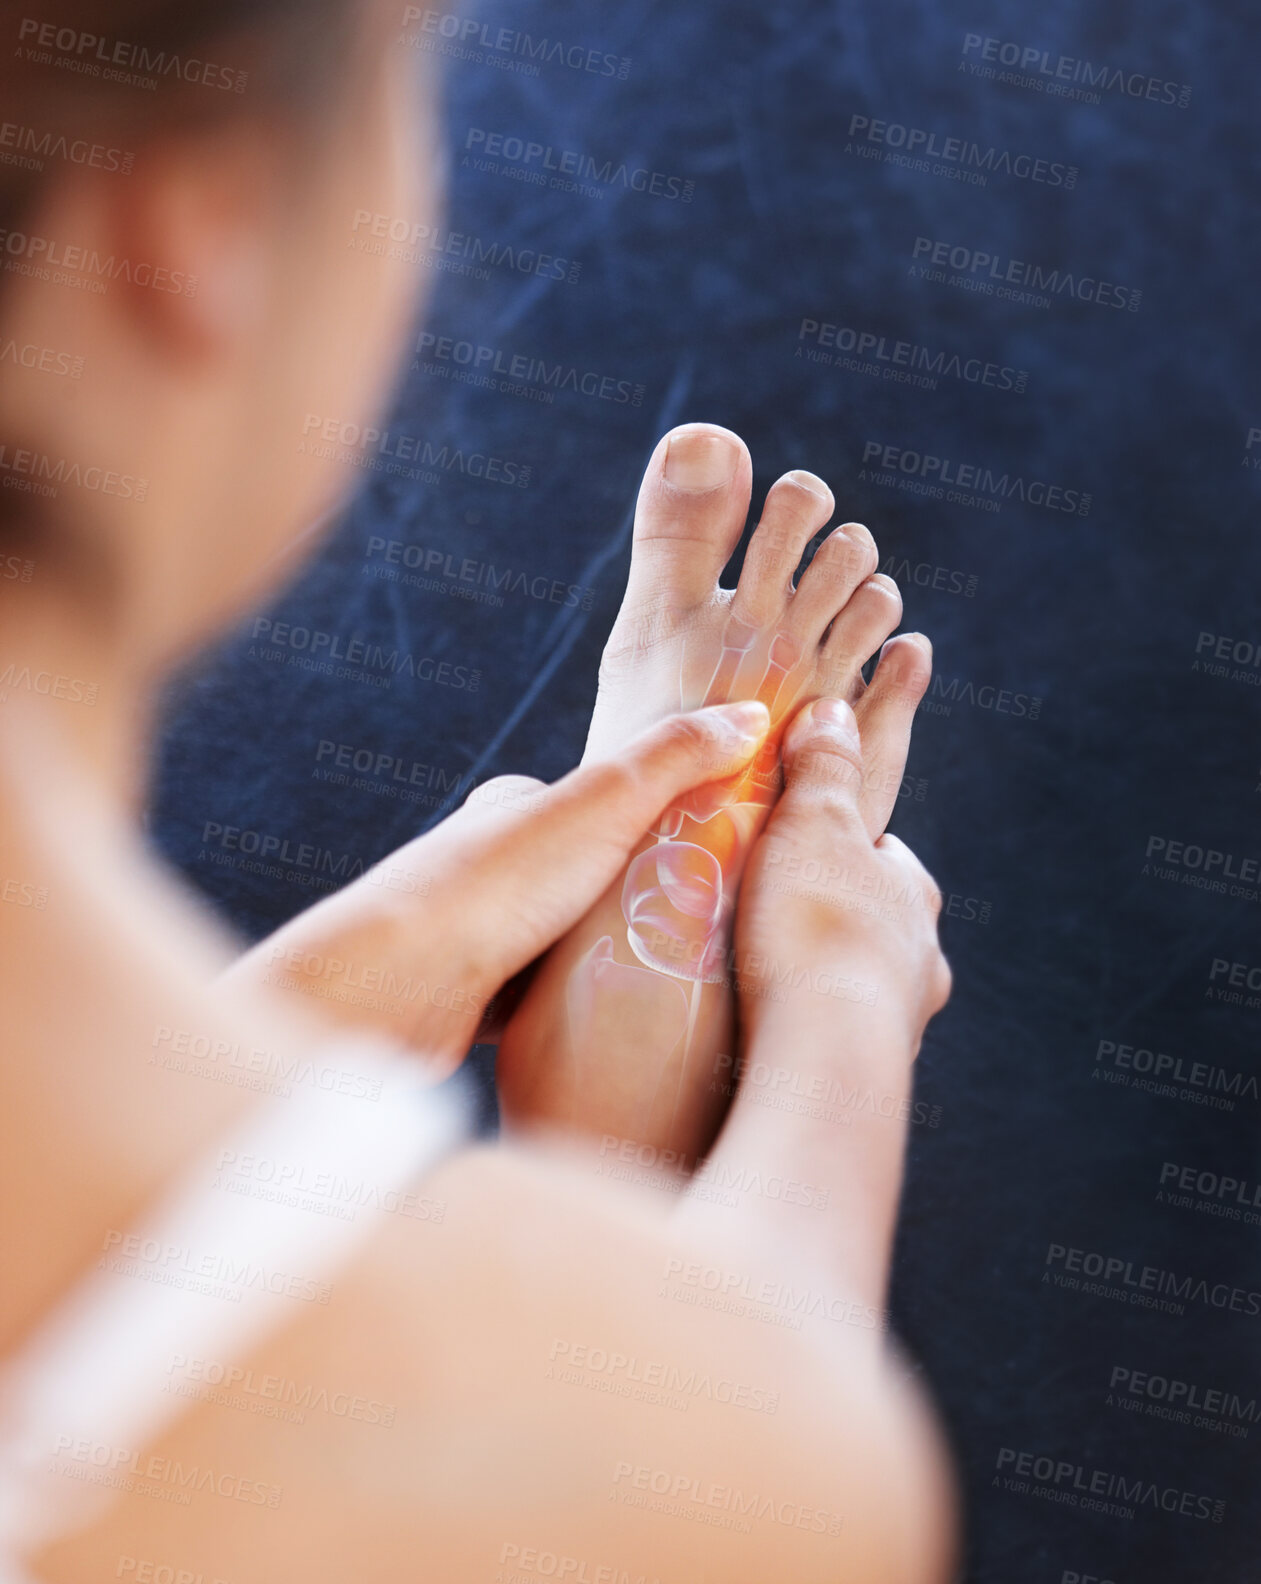 Buy stock photo Foot pain, dance injury and ballet feet strain from fitness, workout and exercise in a gym. Massage, pilates and athlete  accident from stretching or dancer training massaging inflammation with hands